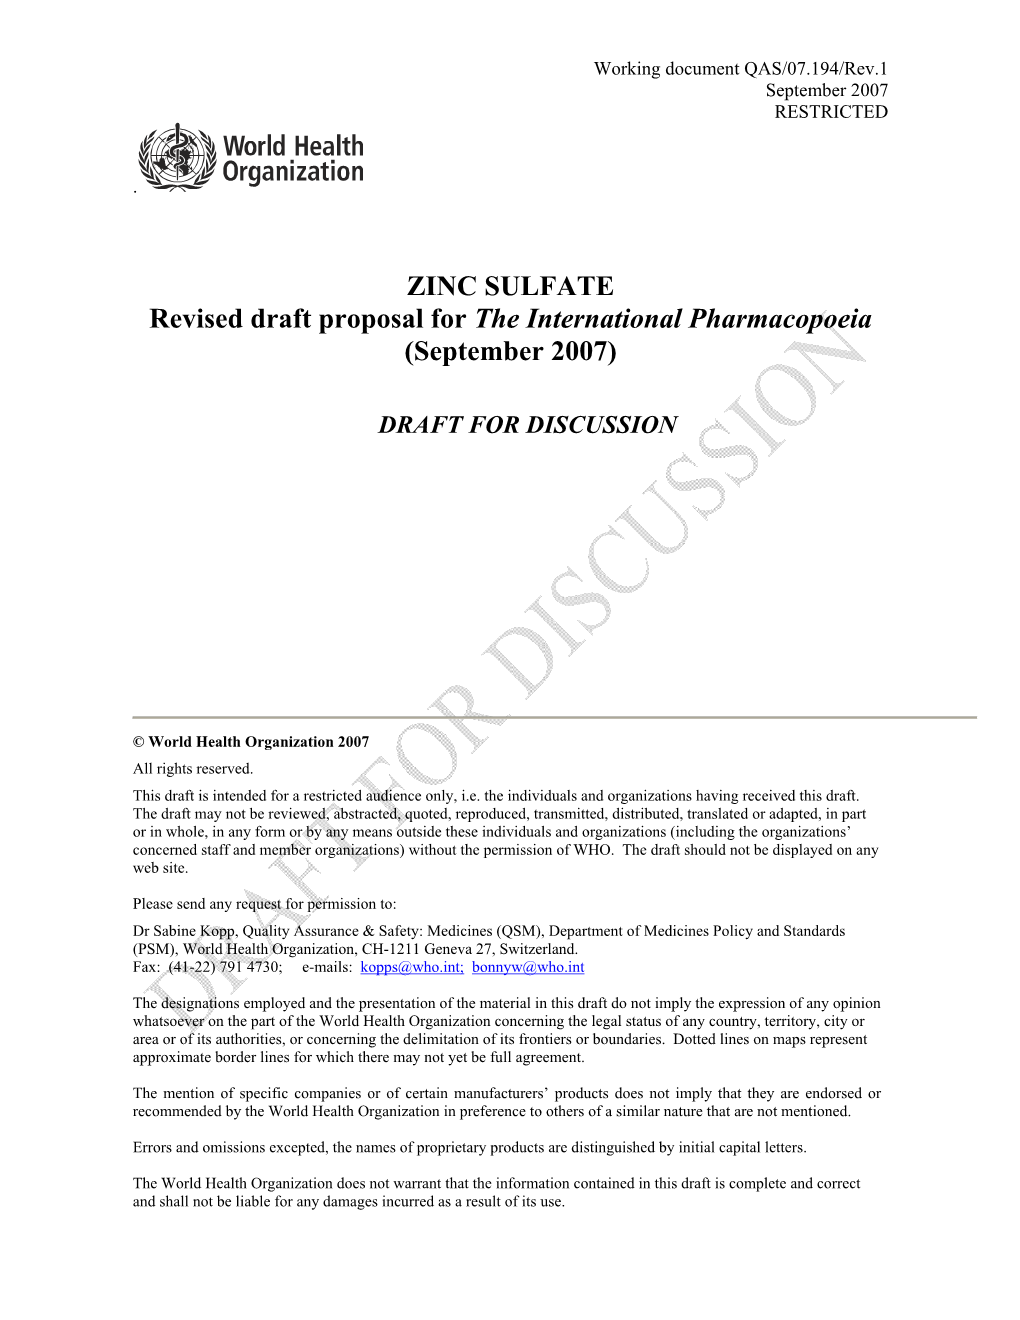 ZINC SULFATE Revised Draft Proposal for the International Pharmacopoeia (September 2007)